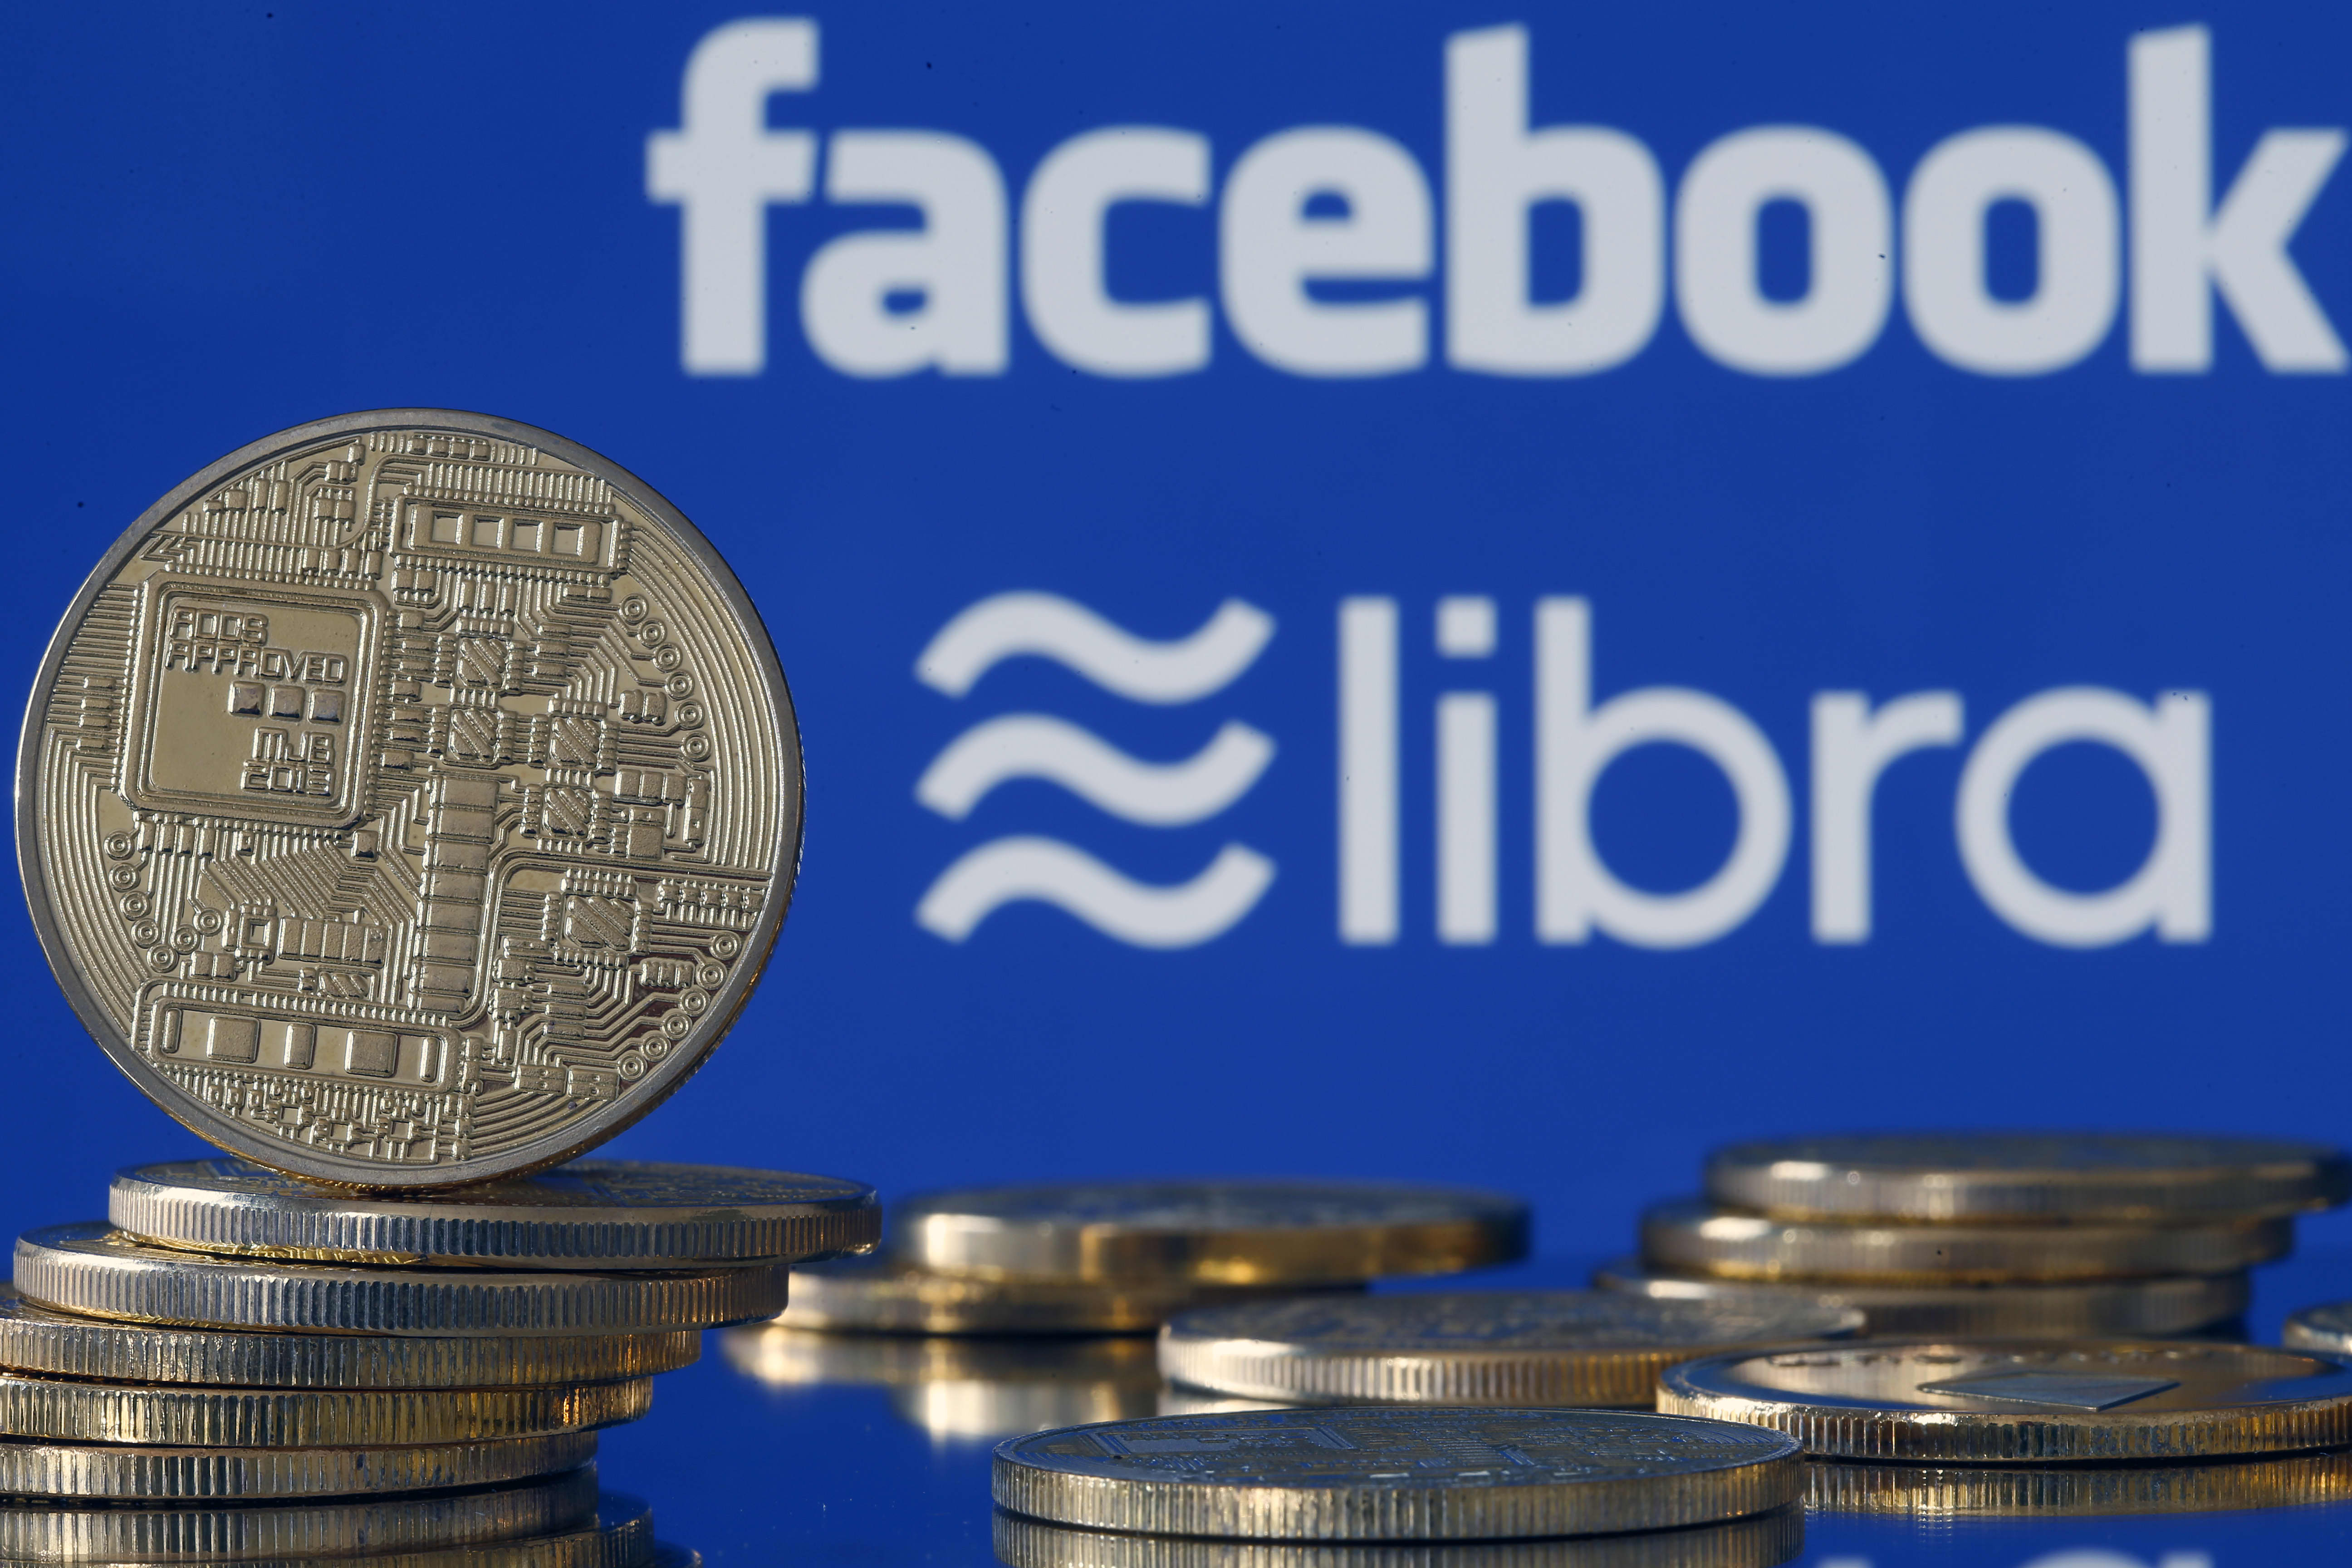 Libra, the cryptocurrency of Facebook